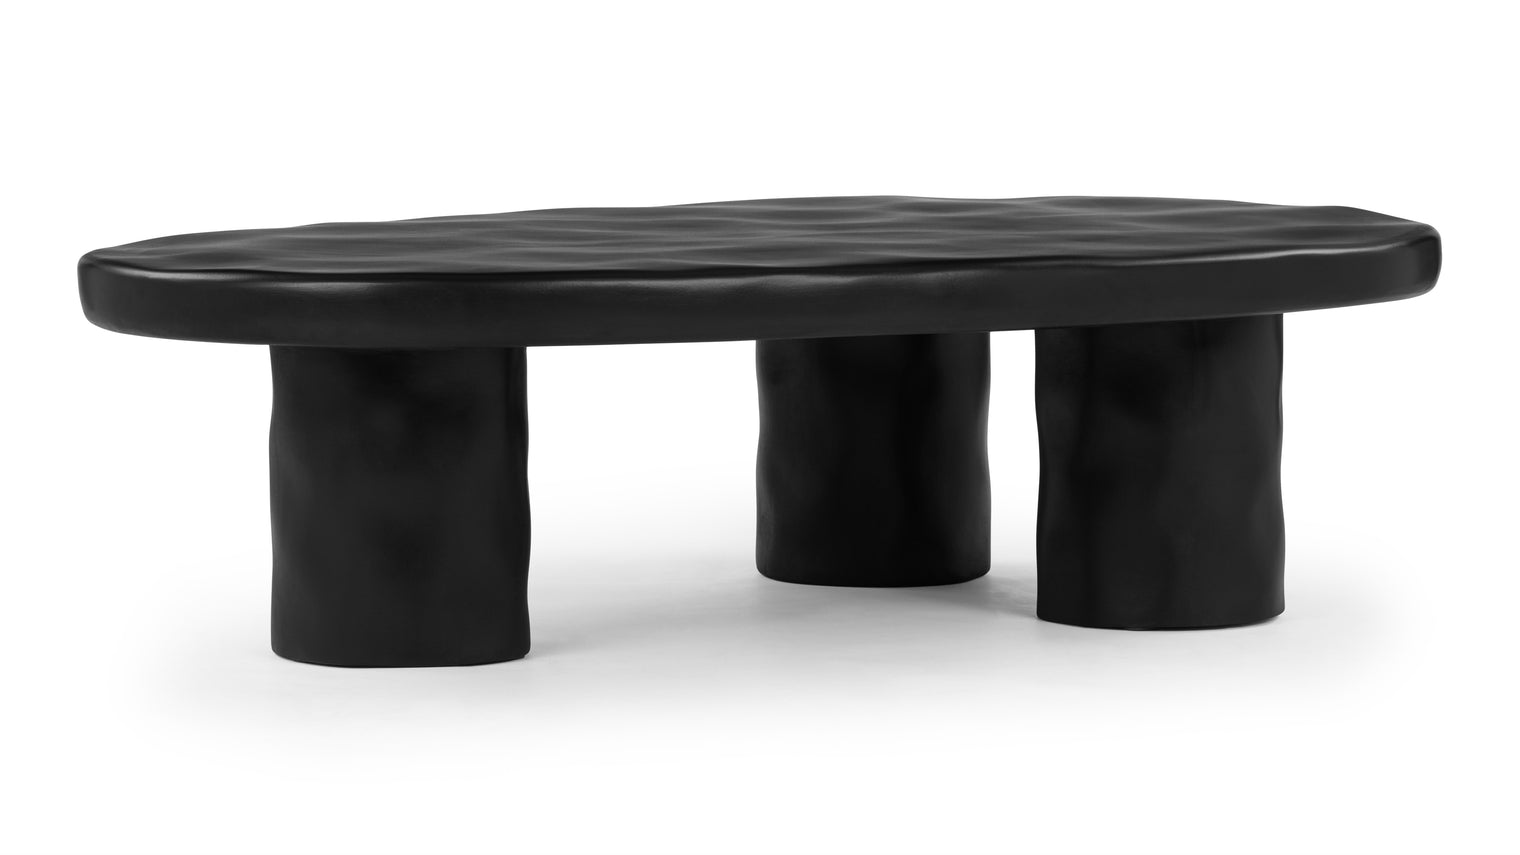 Aster - Aster Coffee Table, Black Concrete